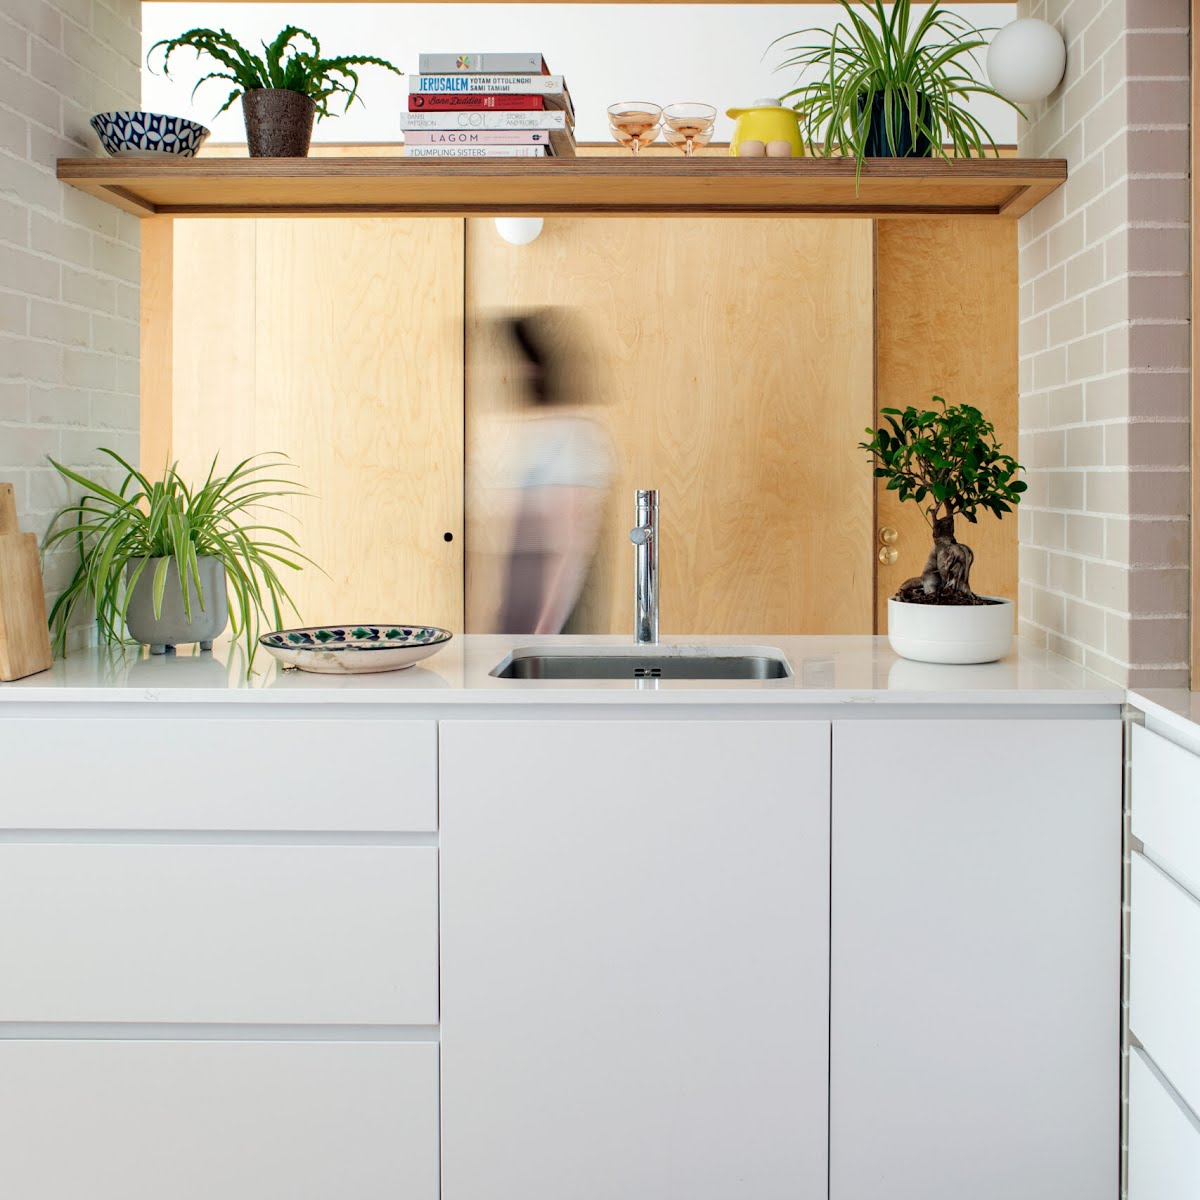 A plaster wall was taken down to create this worktop and sink area, with open shelving above. “It still works to divide the room, but it doesn’t feel so closed in.”